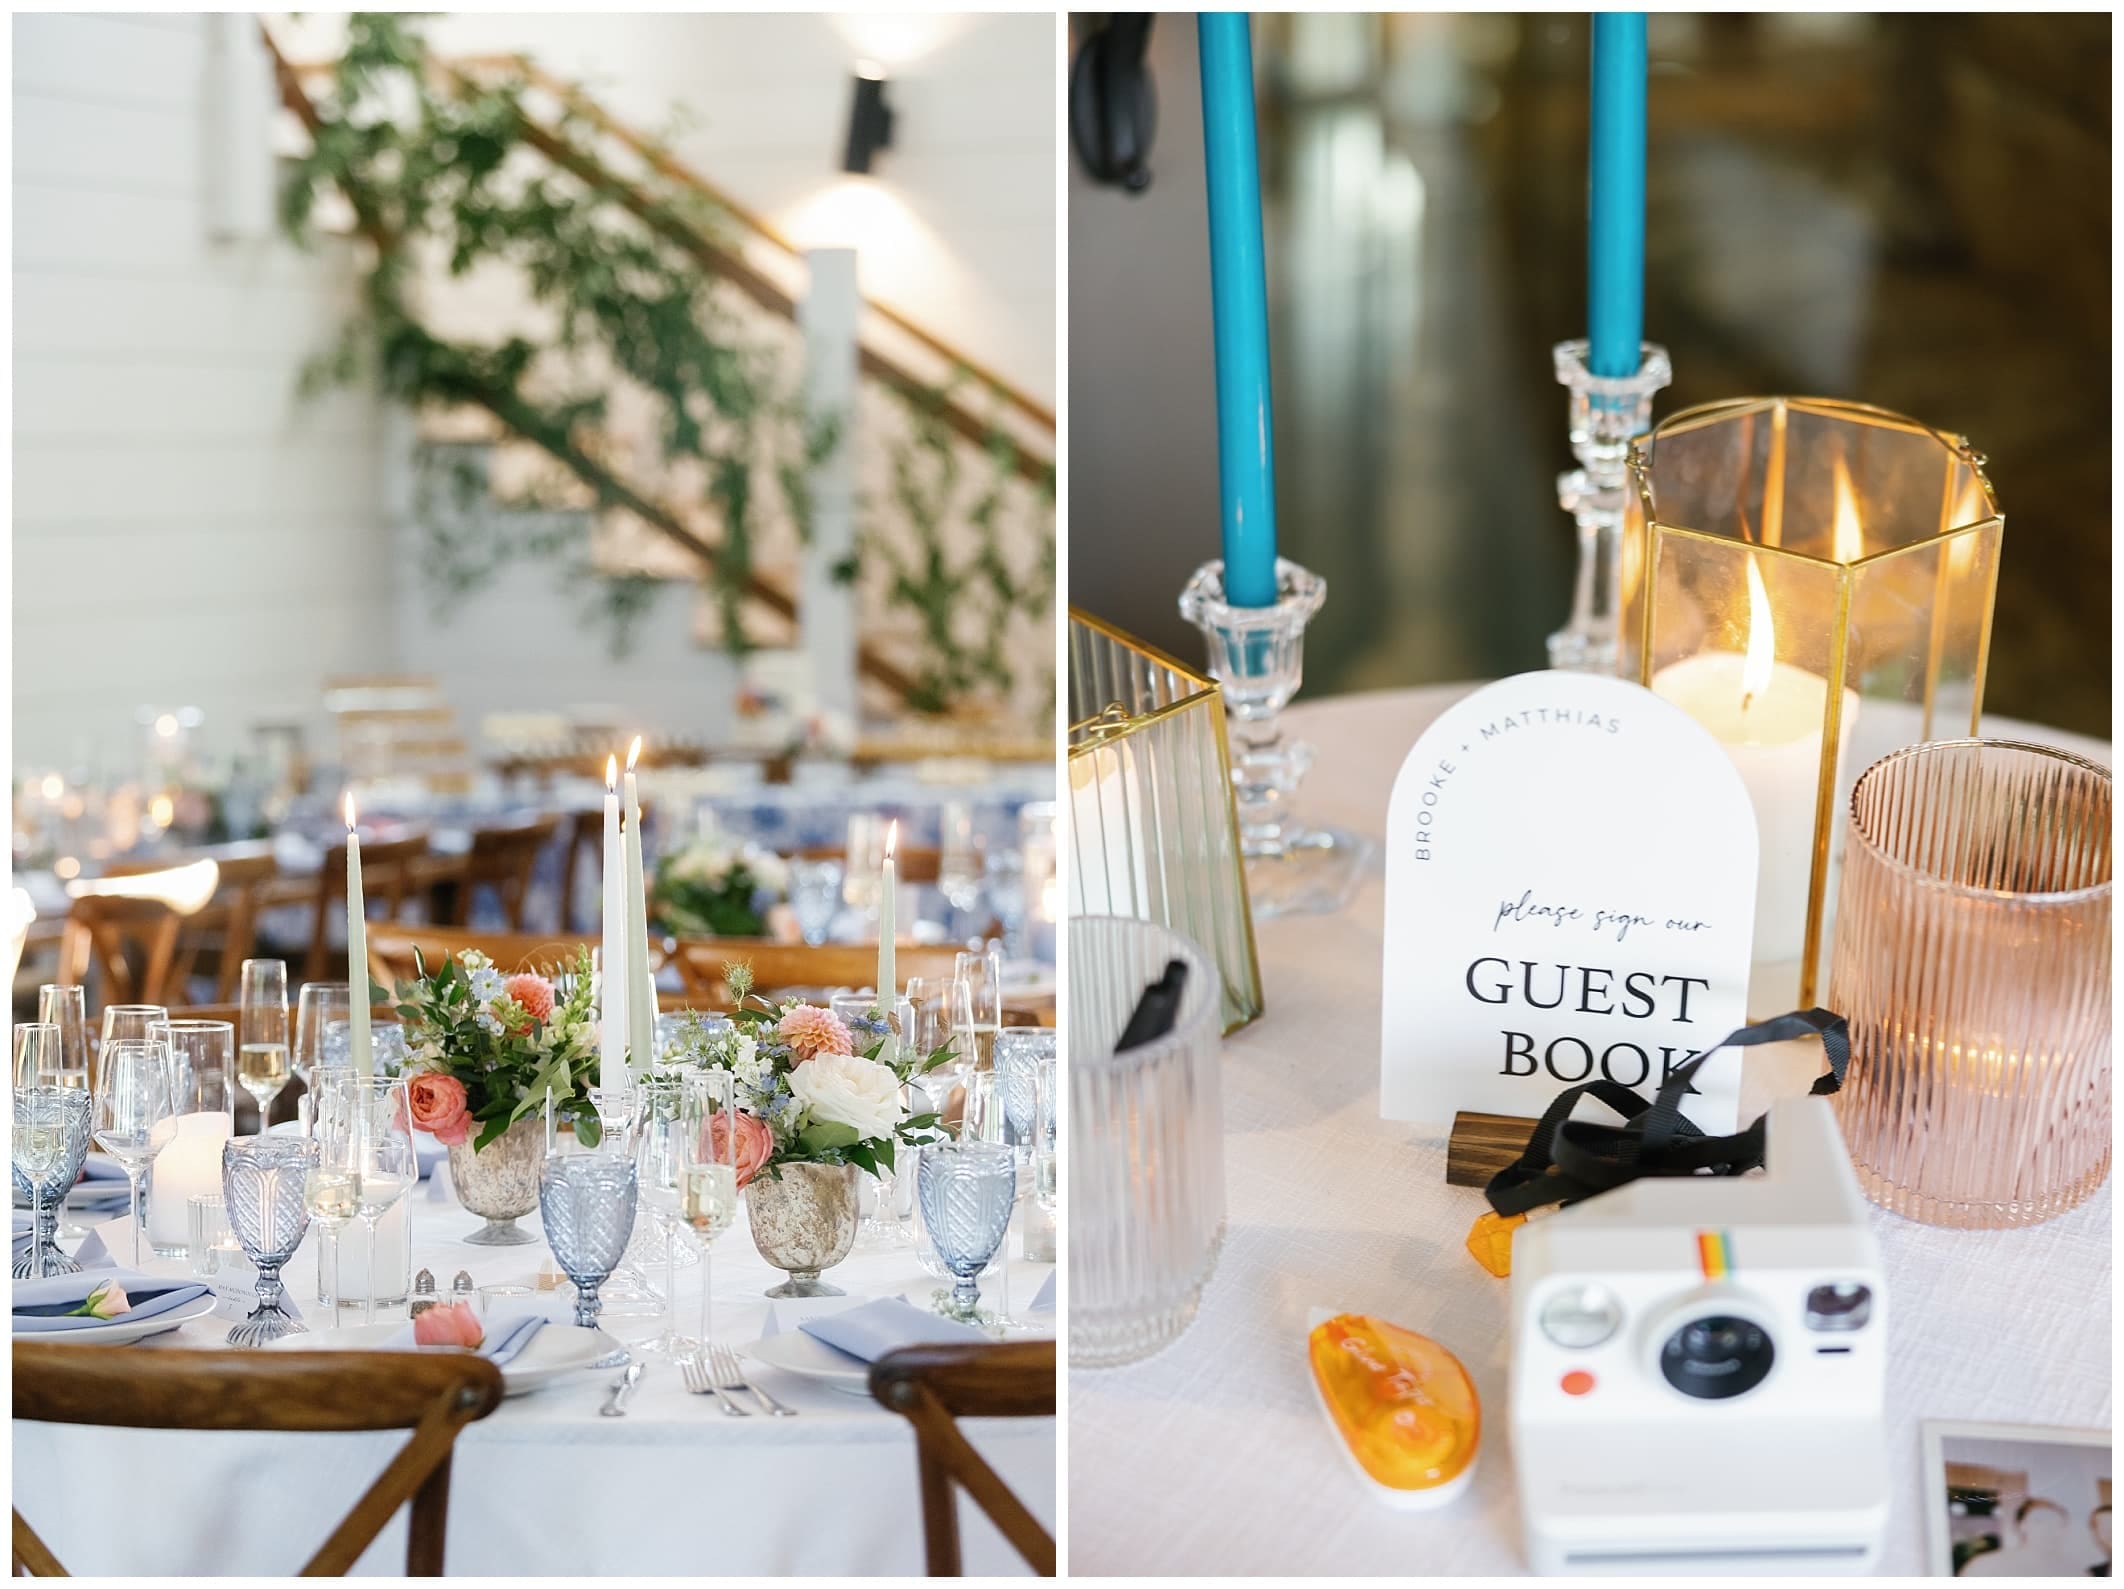 Two pictures of a wedding reception table with candles and a guest book.